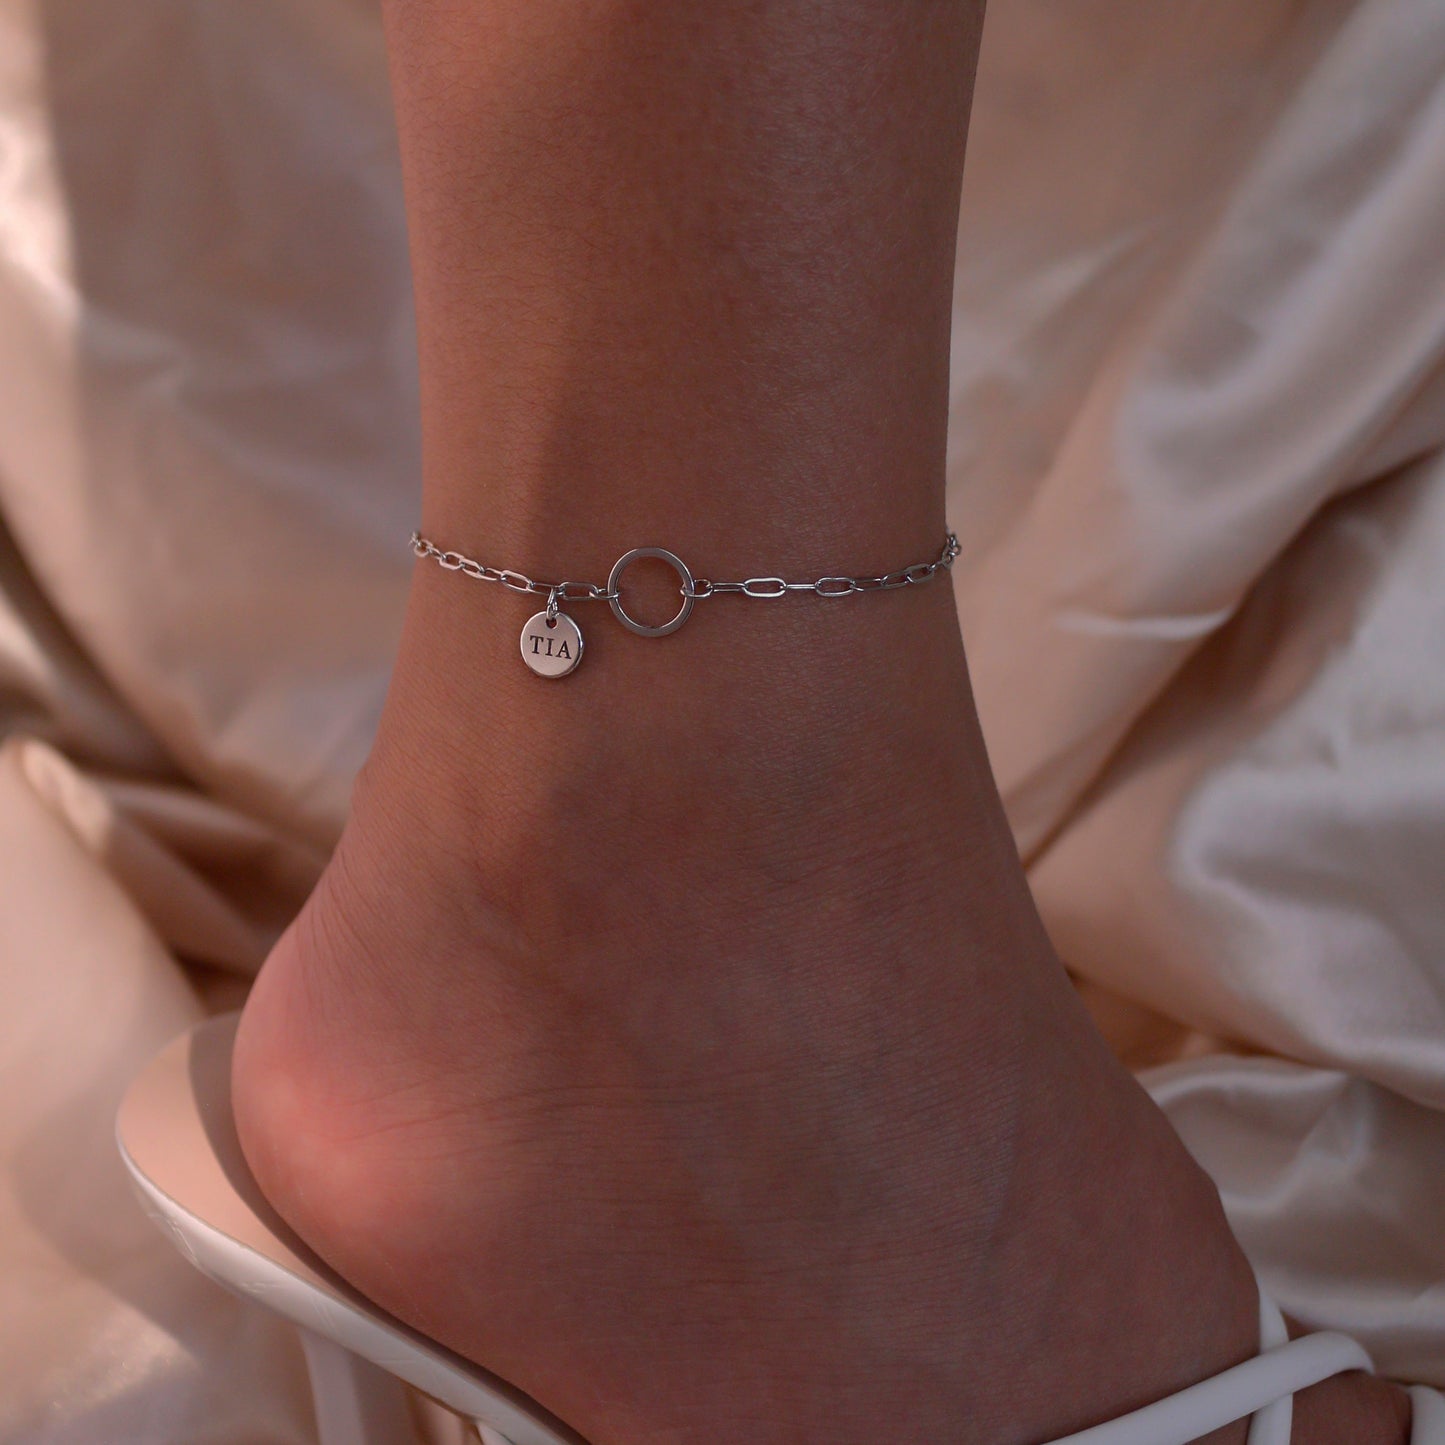 Name Circle Anklet Unique Ring Coin Anklets Initial anklets cute Anklet Gift for her